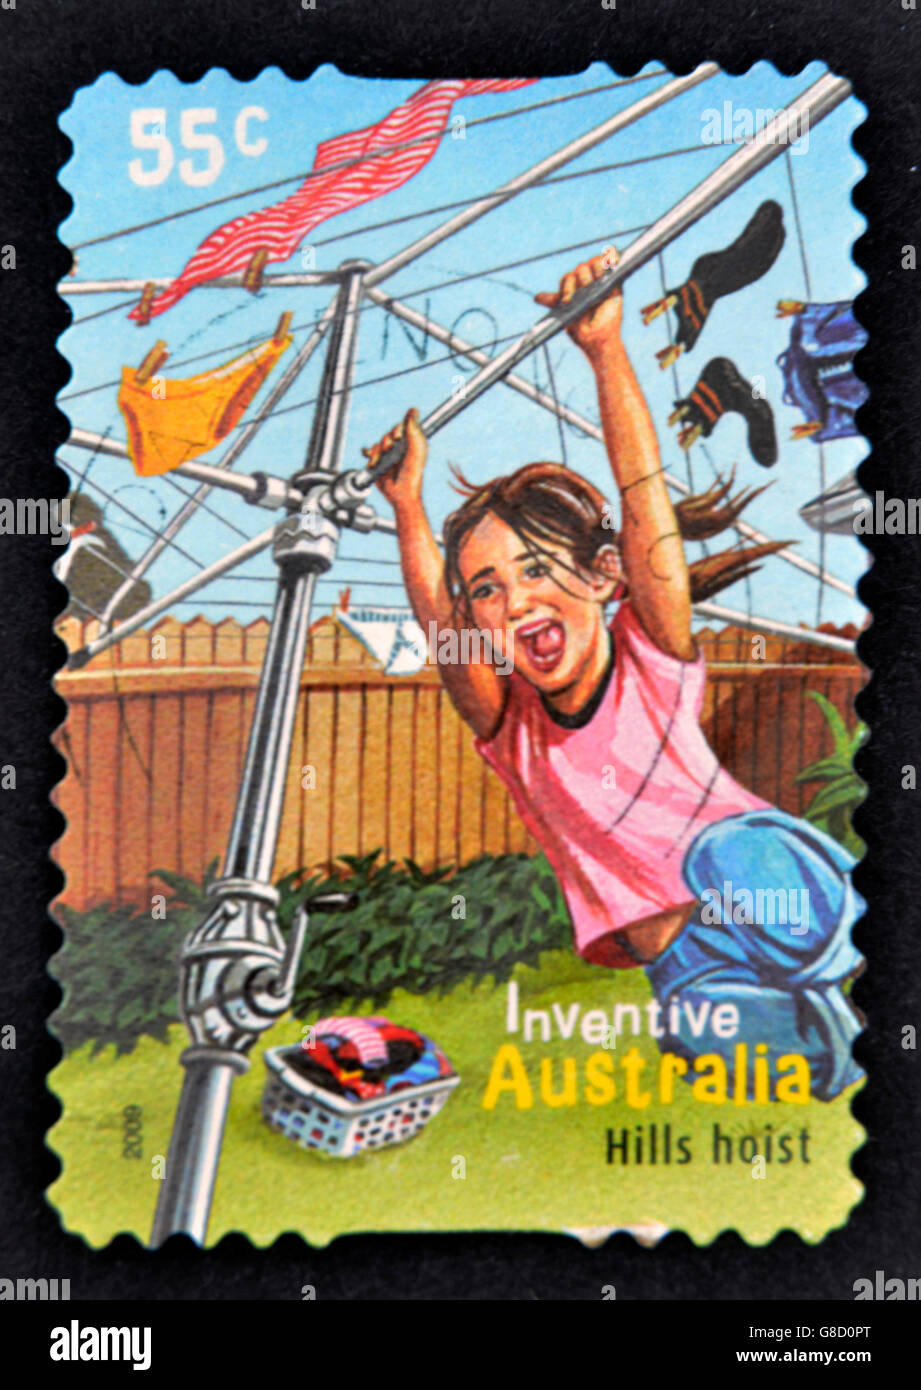 AUSTRALIA - CIRCA 2009: A stamp printed in Australia shows a girl playing on a clothesline as a hills hoist, inventive, circa 20 Stock Photo